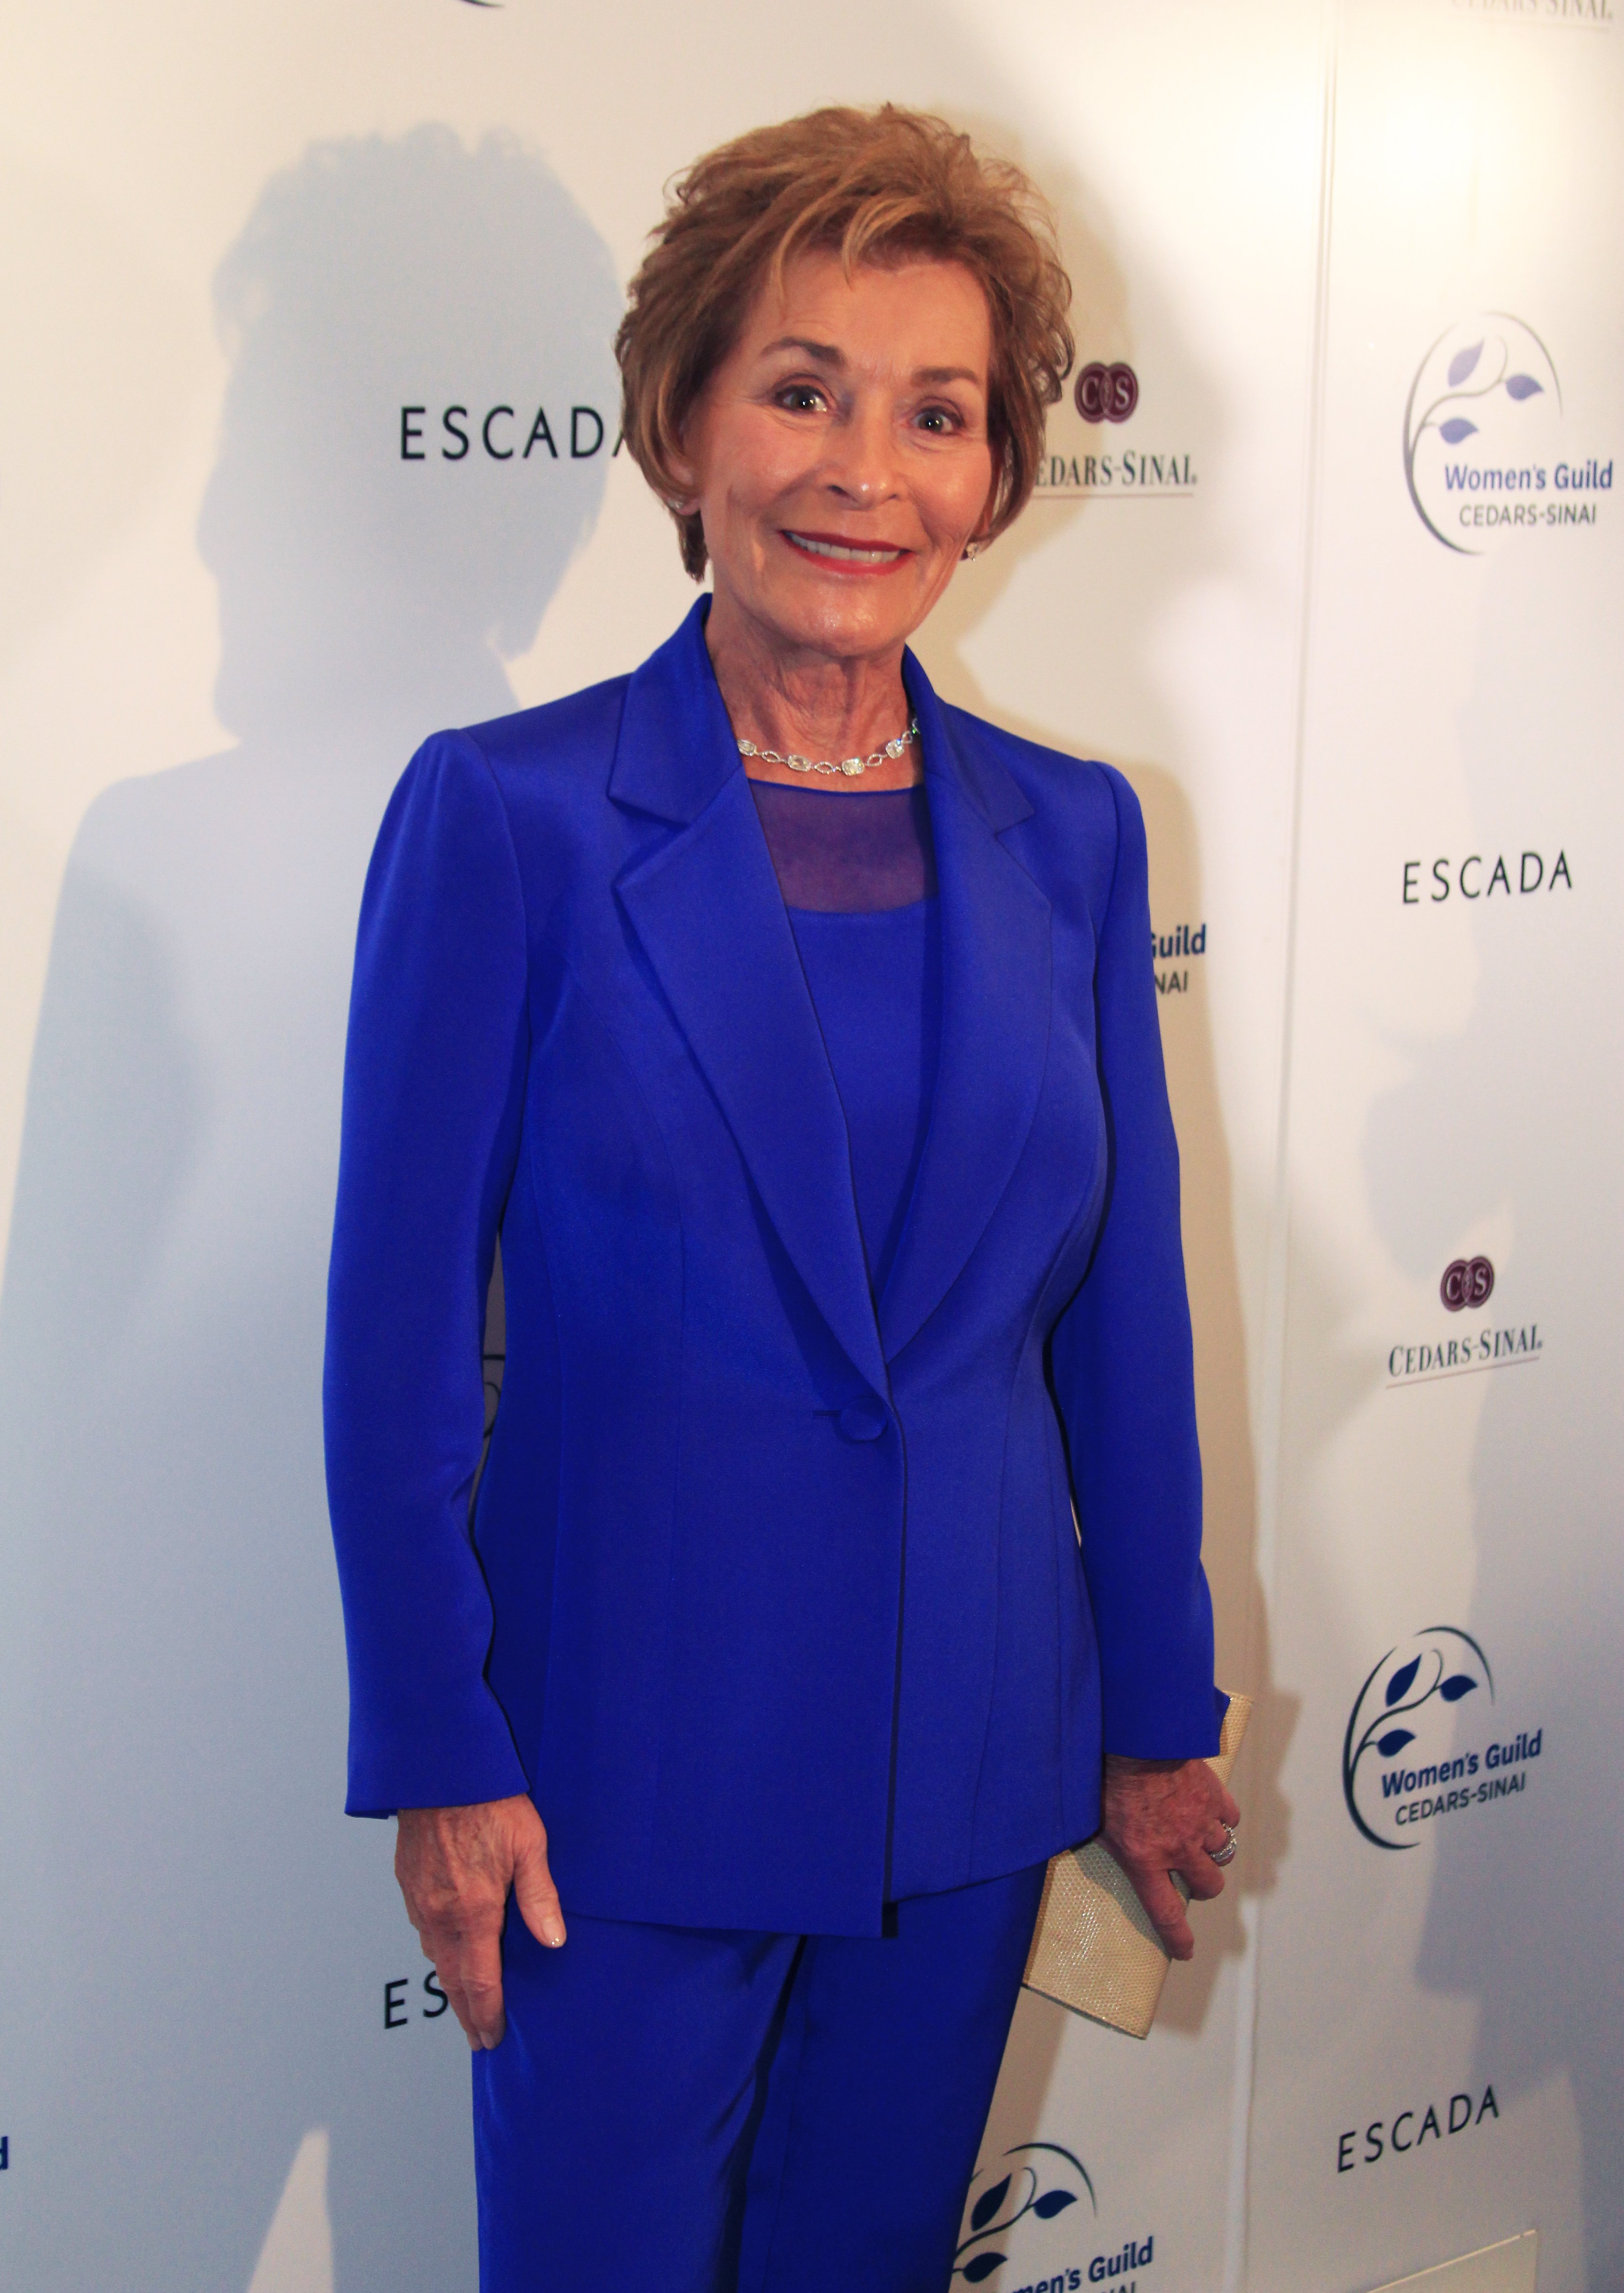 Judge Judy (Judy Sheindlin) attends the Women's Guild Cedars-Sinai's Annual Luncheon at Regent Beverly Wilshire Hotel on April 13, 2015 in Beverly Hills, California. | Source: Getty Images